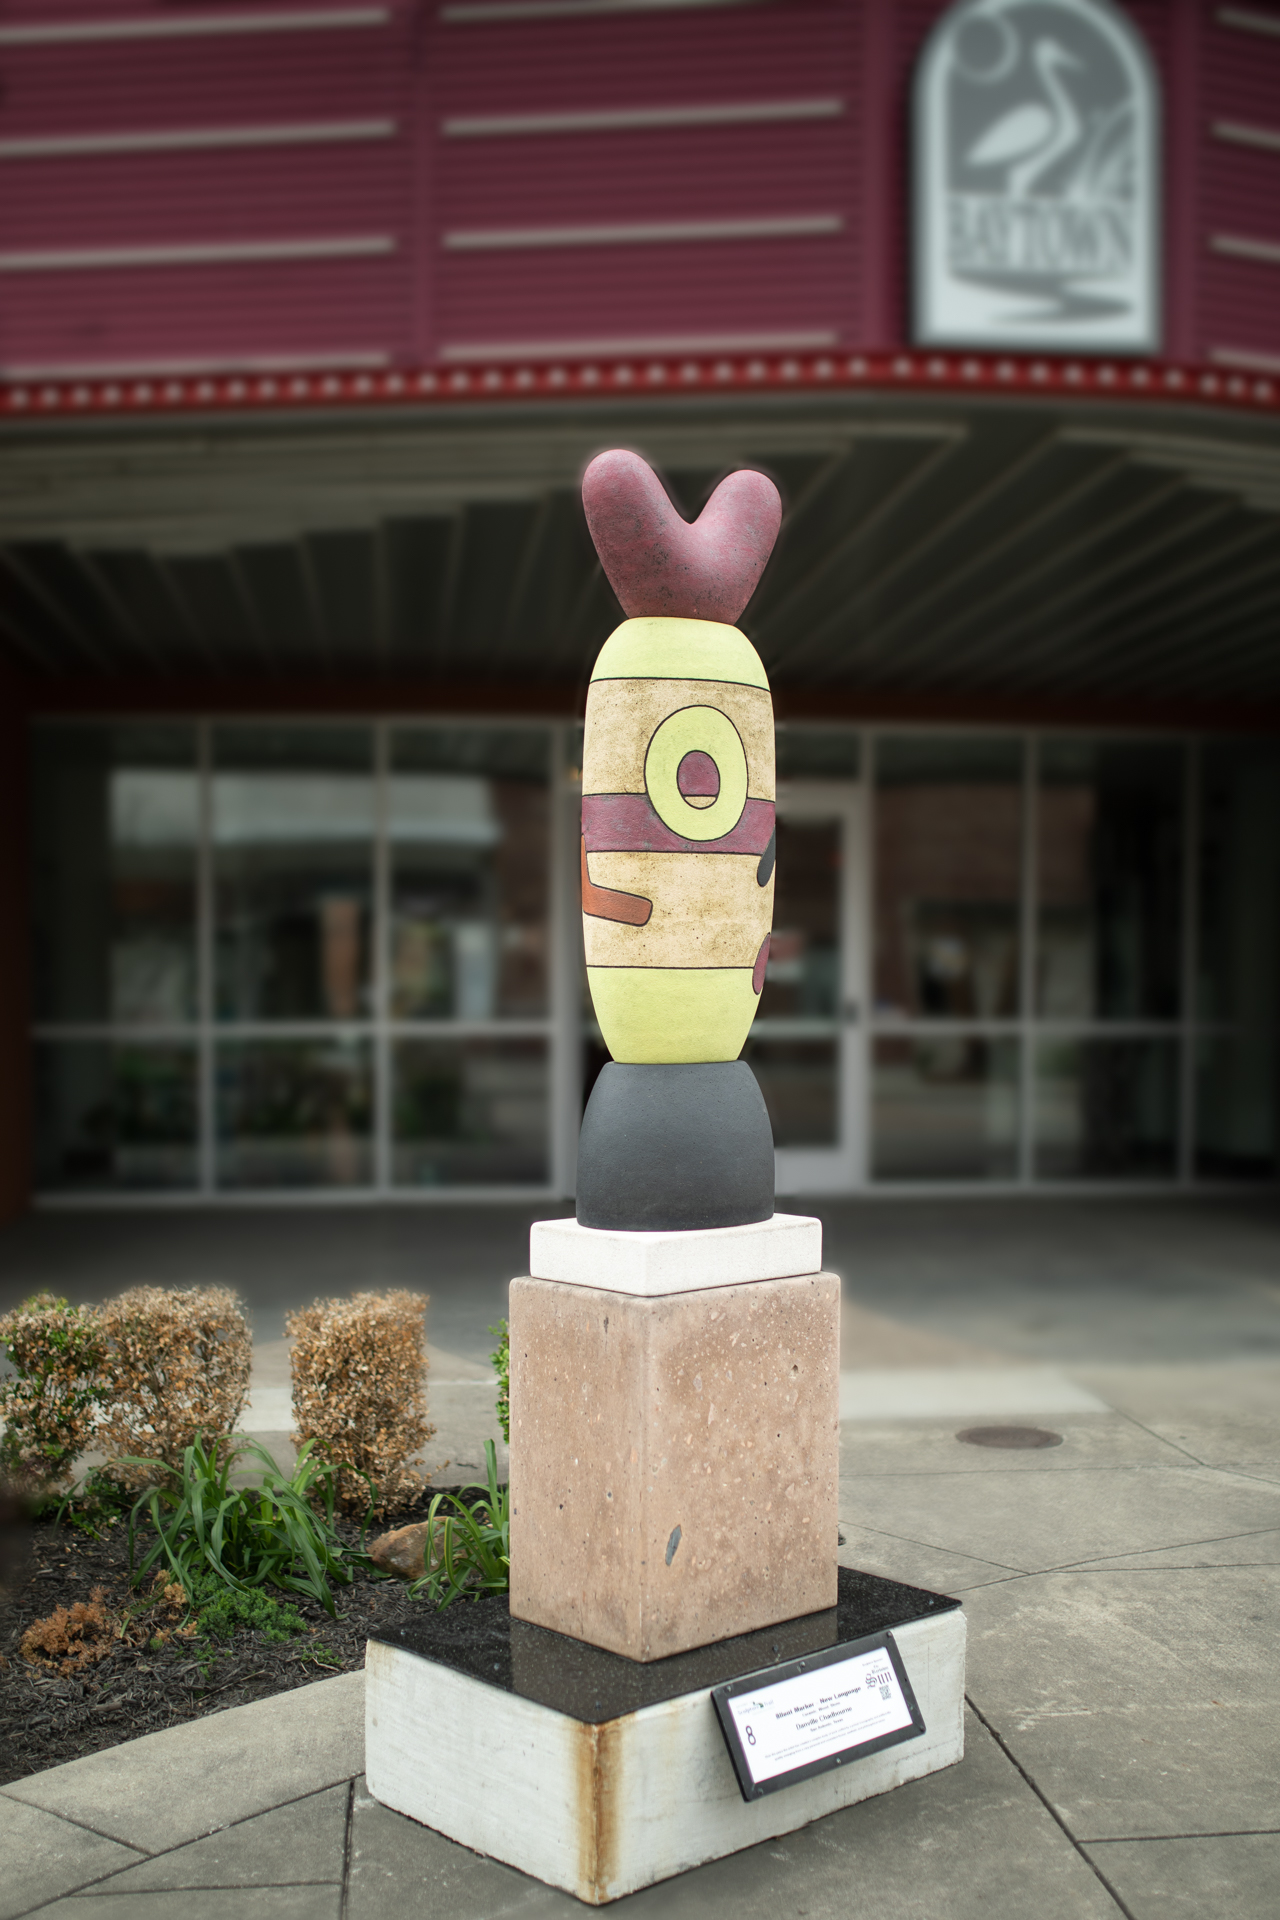 A small yellow sculpture with an eye-like design and red top in front of a building